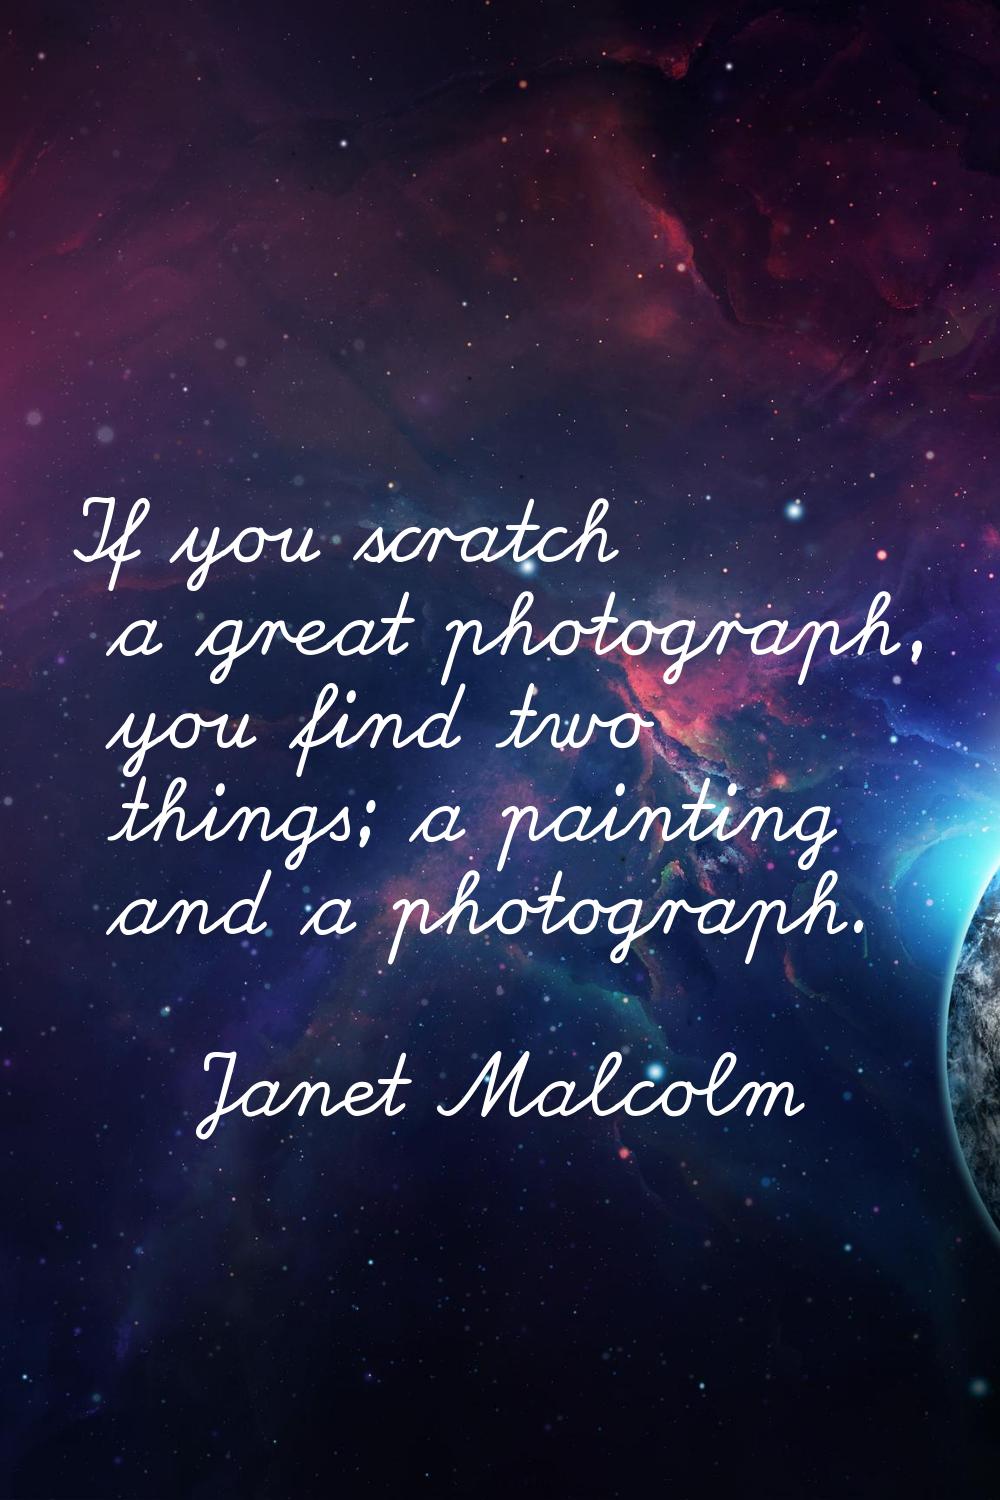 If you scratch a great photograph, you find two things; a painting and a photograph.